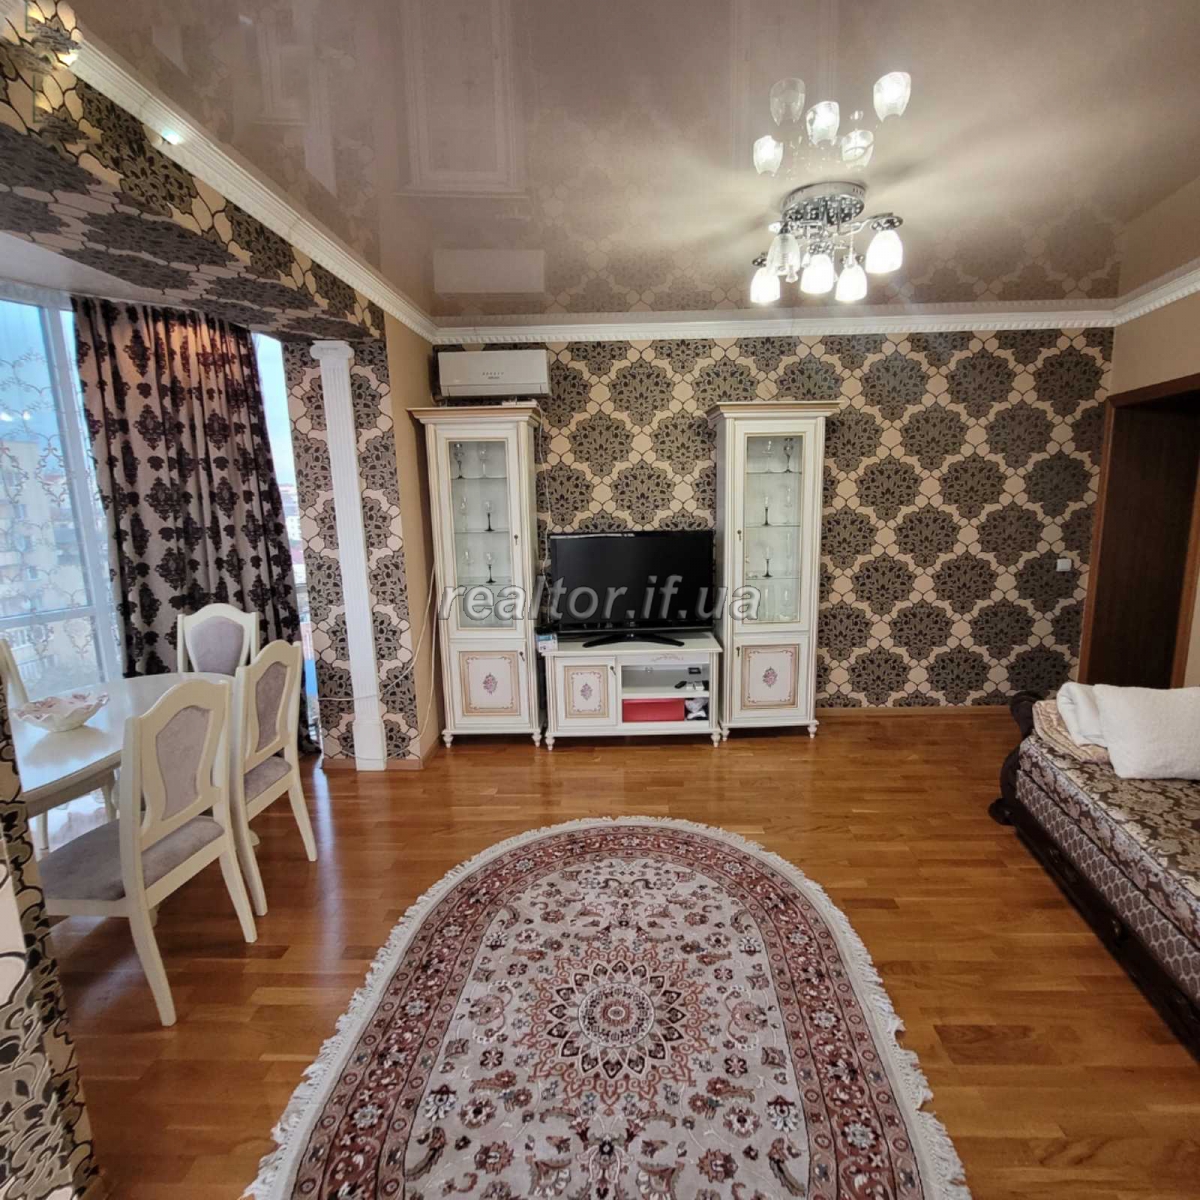 2 bedroom apartment for sale on Tychyna Street